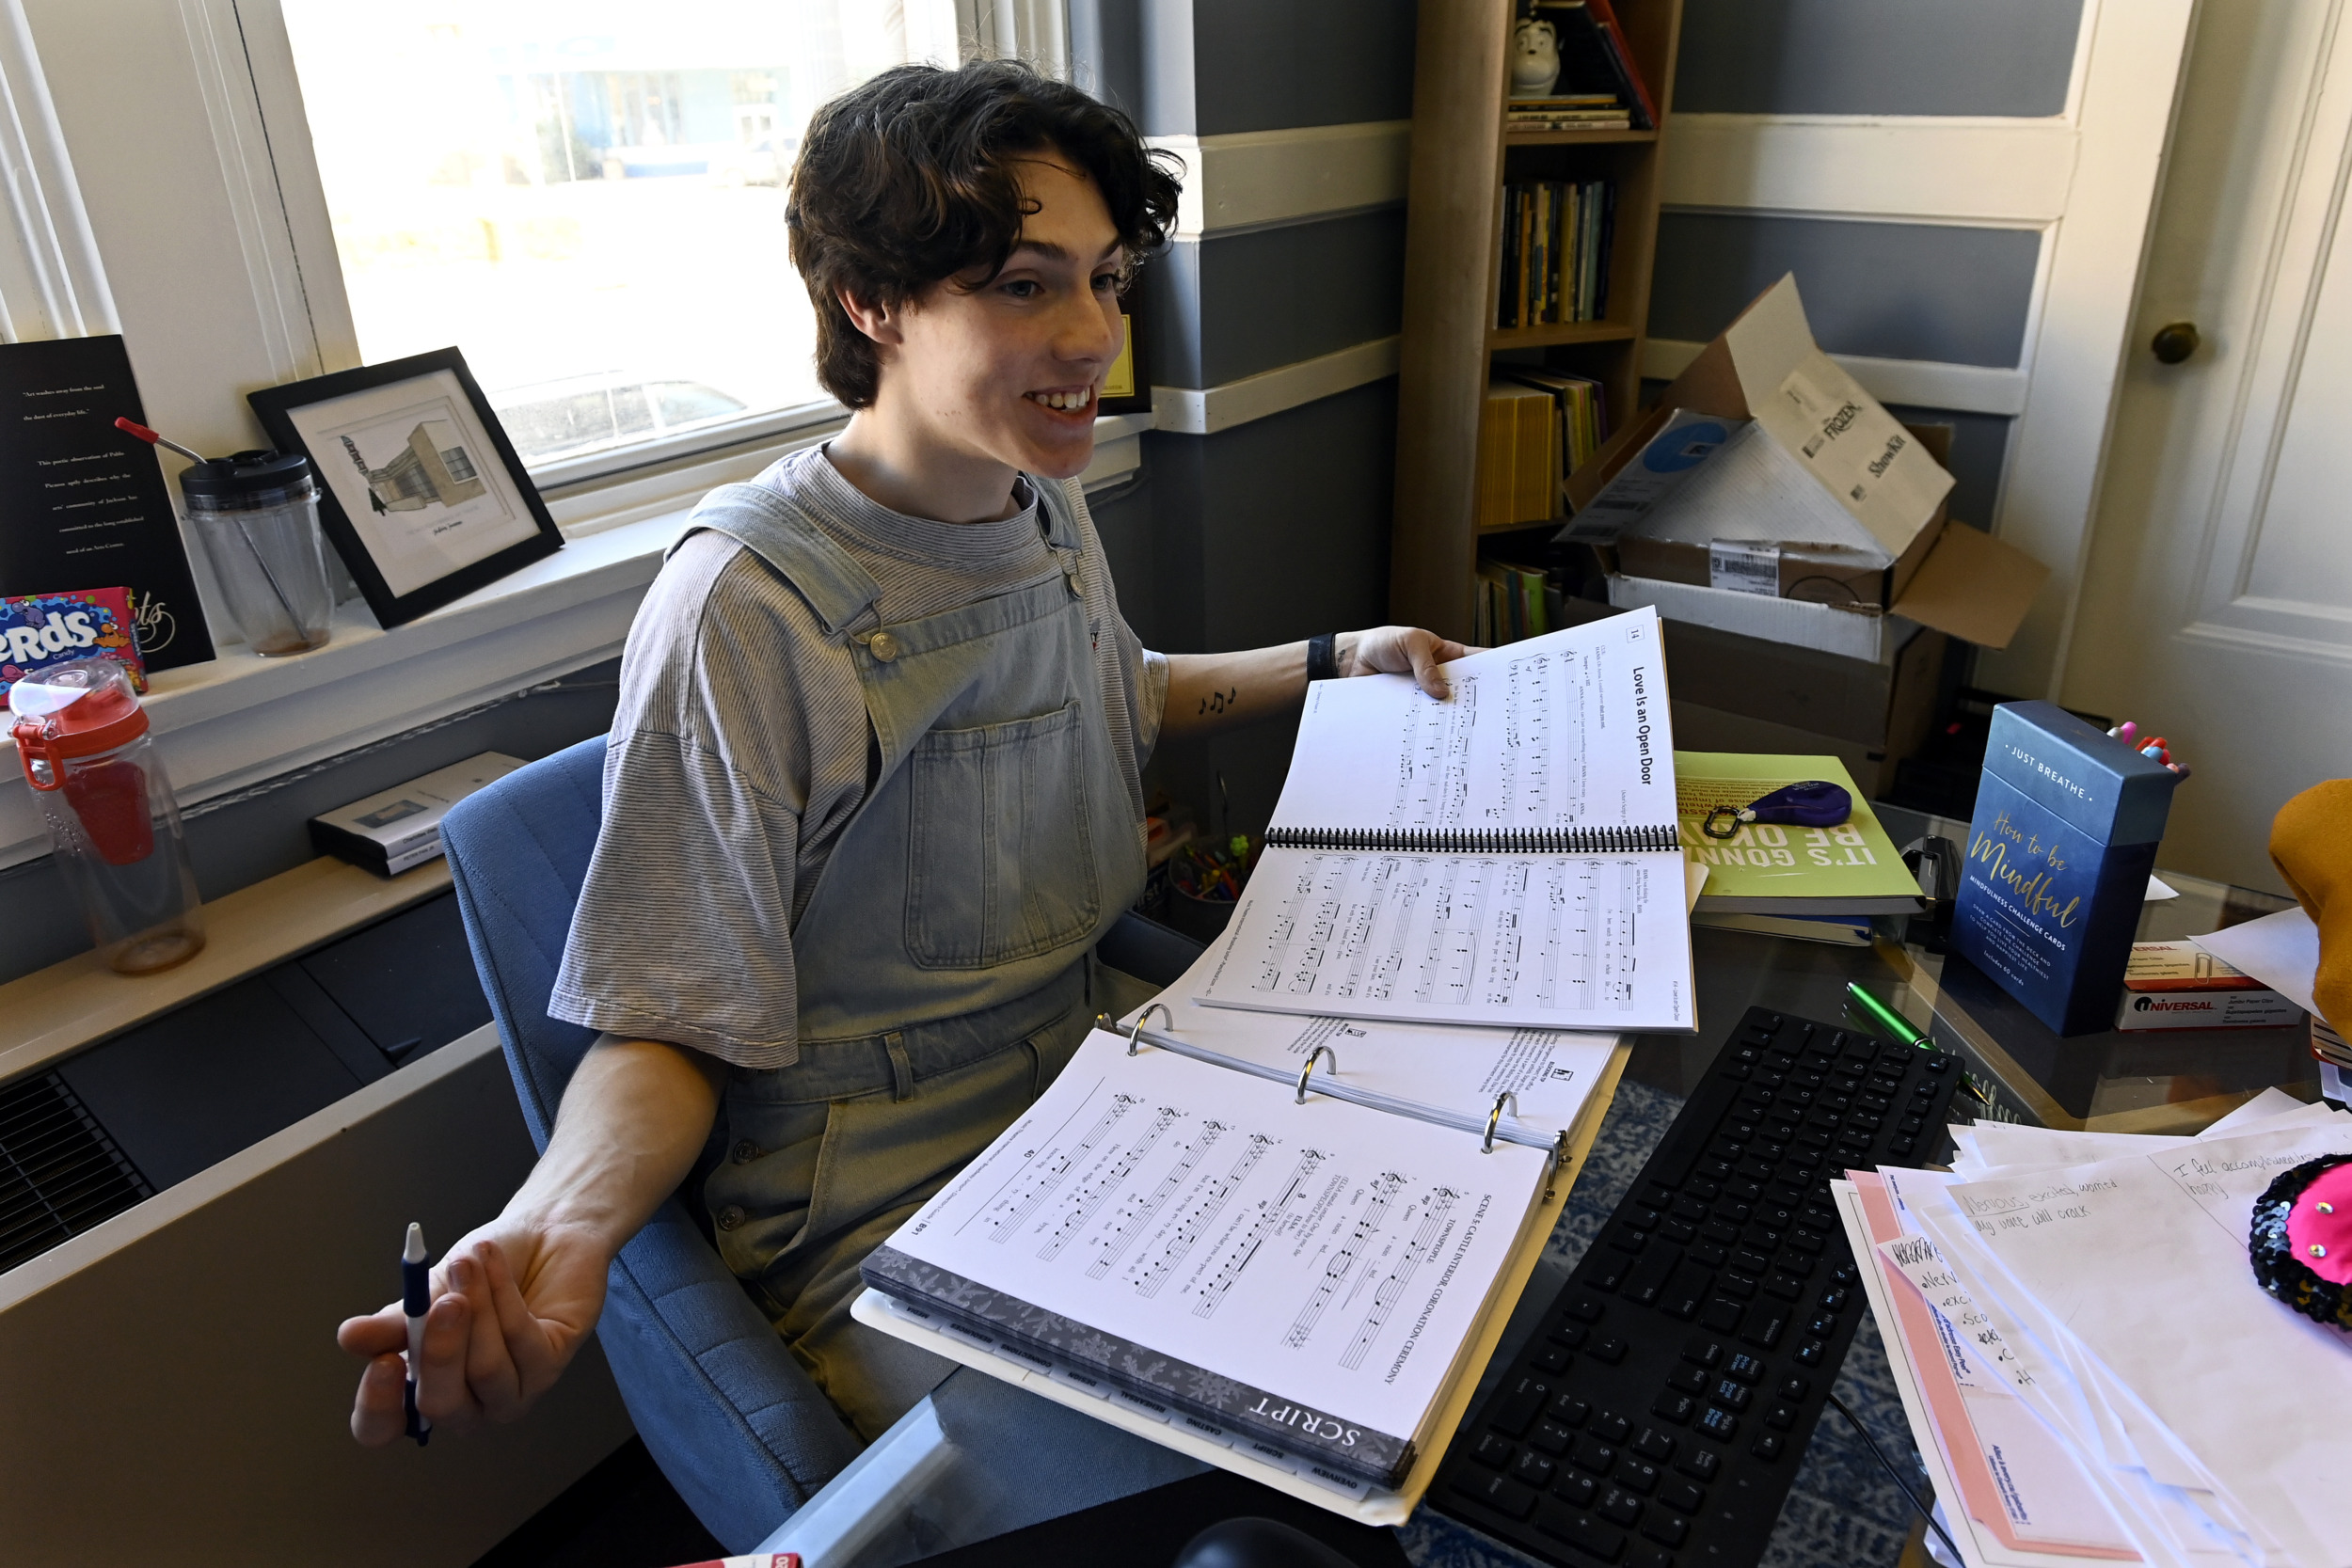 Skipping College: Dark-haired person in gray t-shirt sits at desk filled with open notebooks and papers